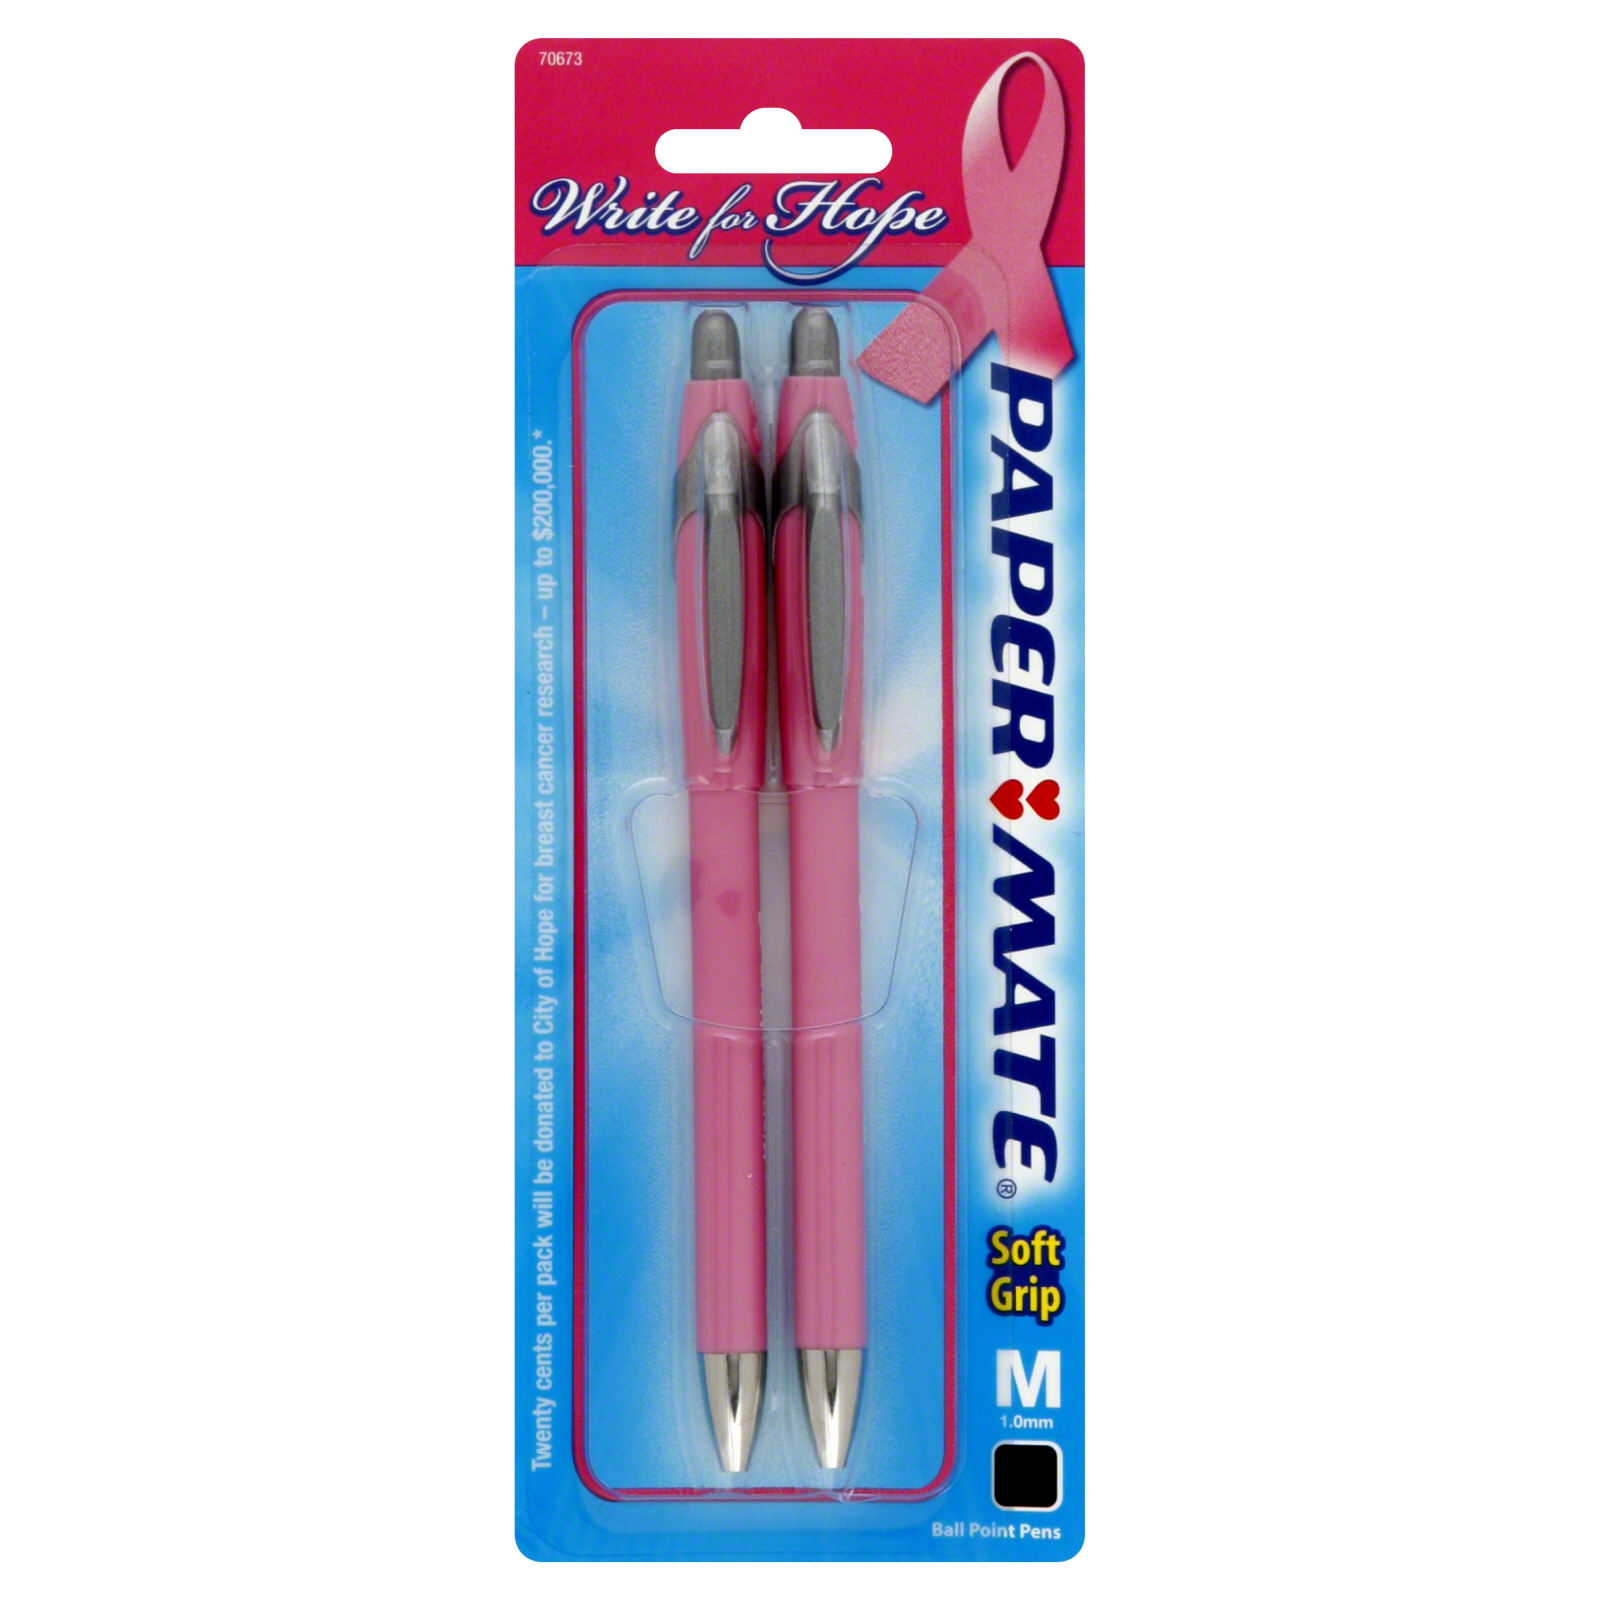 70673 Paper-Mate Write For Hope Ball Point Pens, Medium Point, 1.0 mm, Black Ink, 2 pens